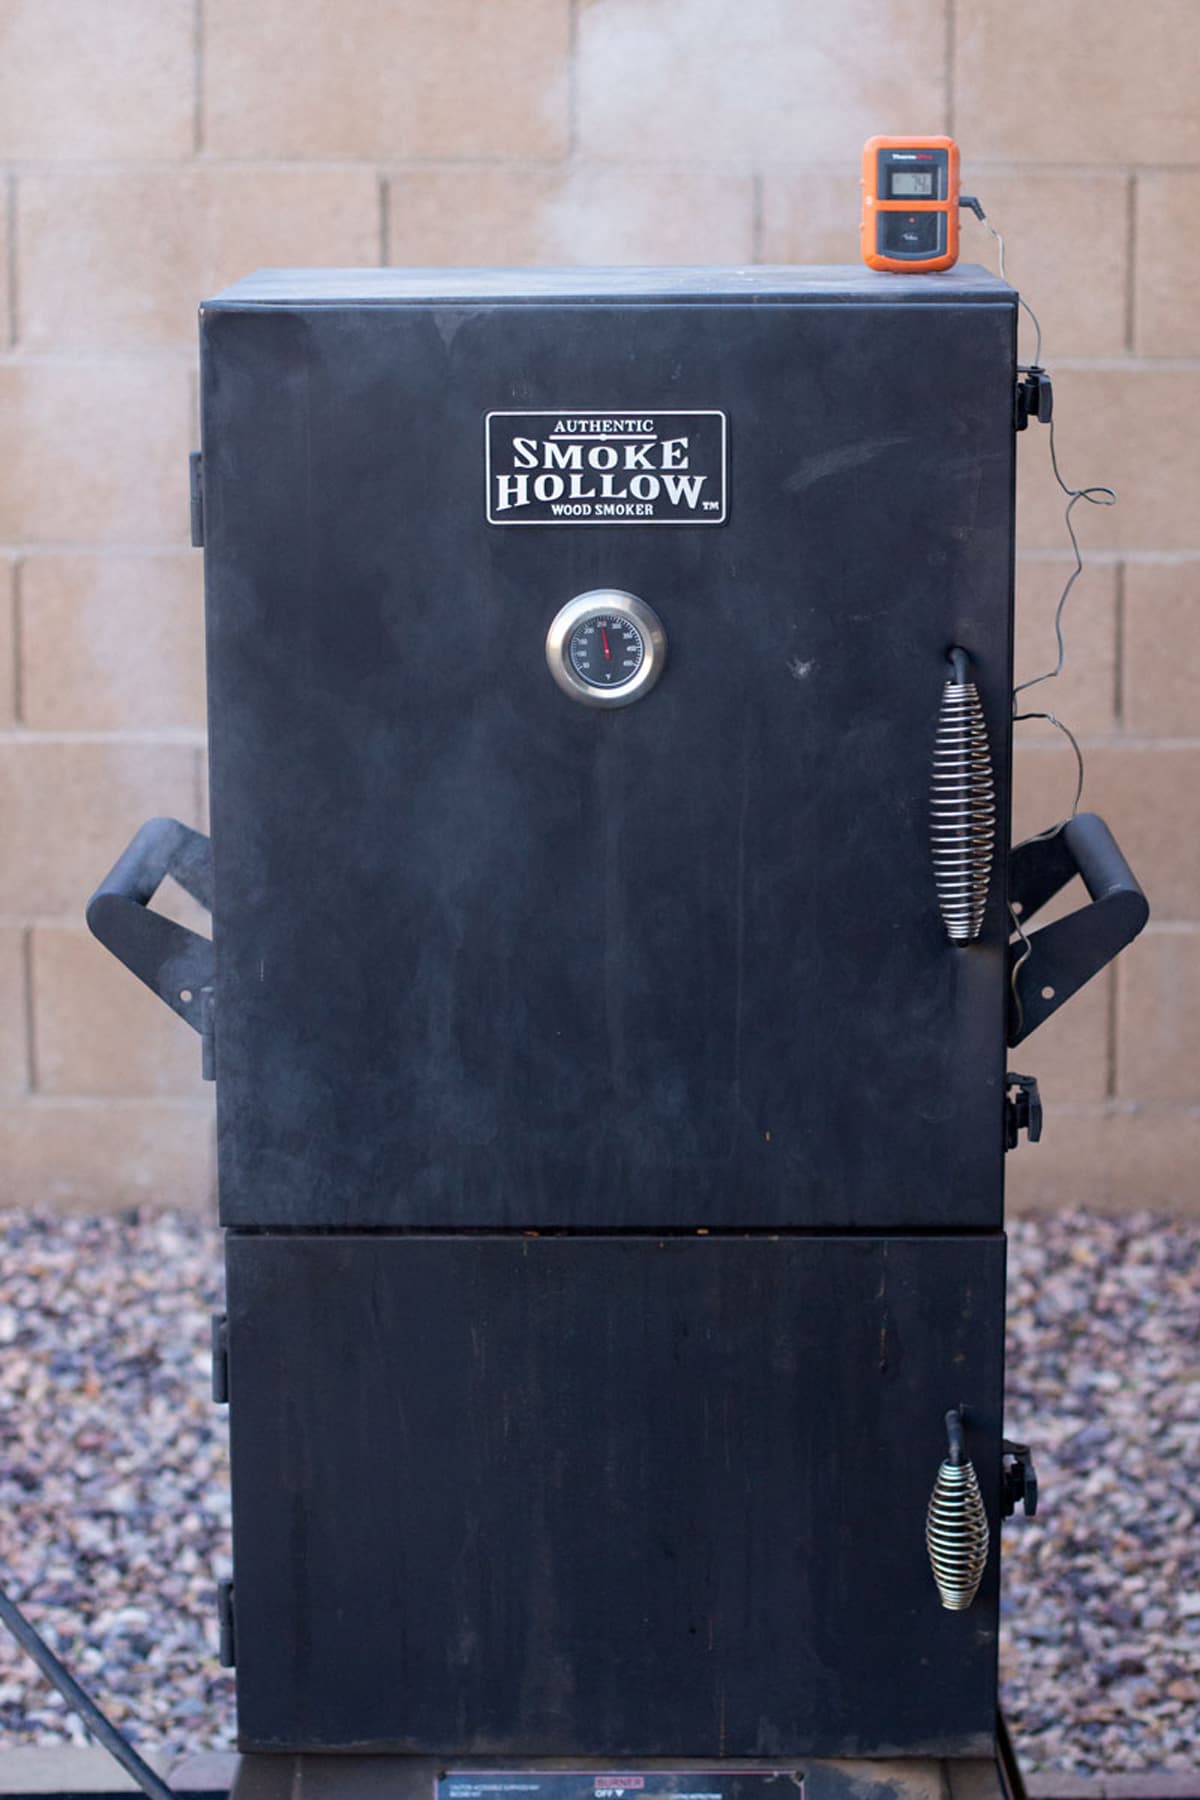 Smoke coming out of a smoker, temperature gauge on smoker.